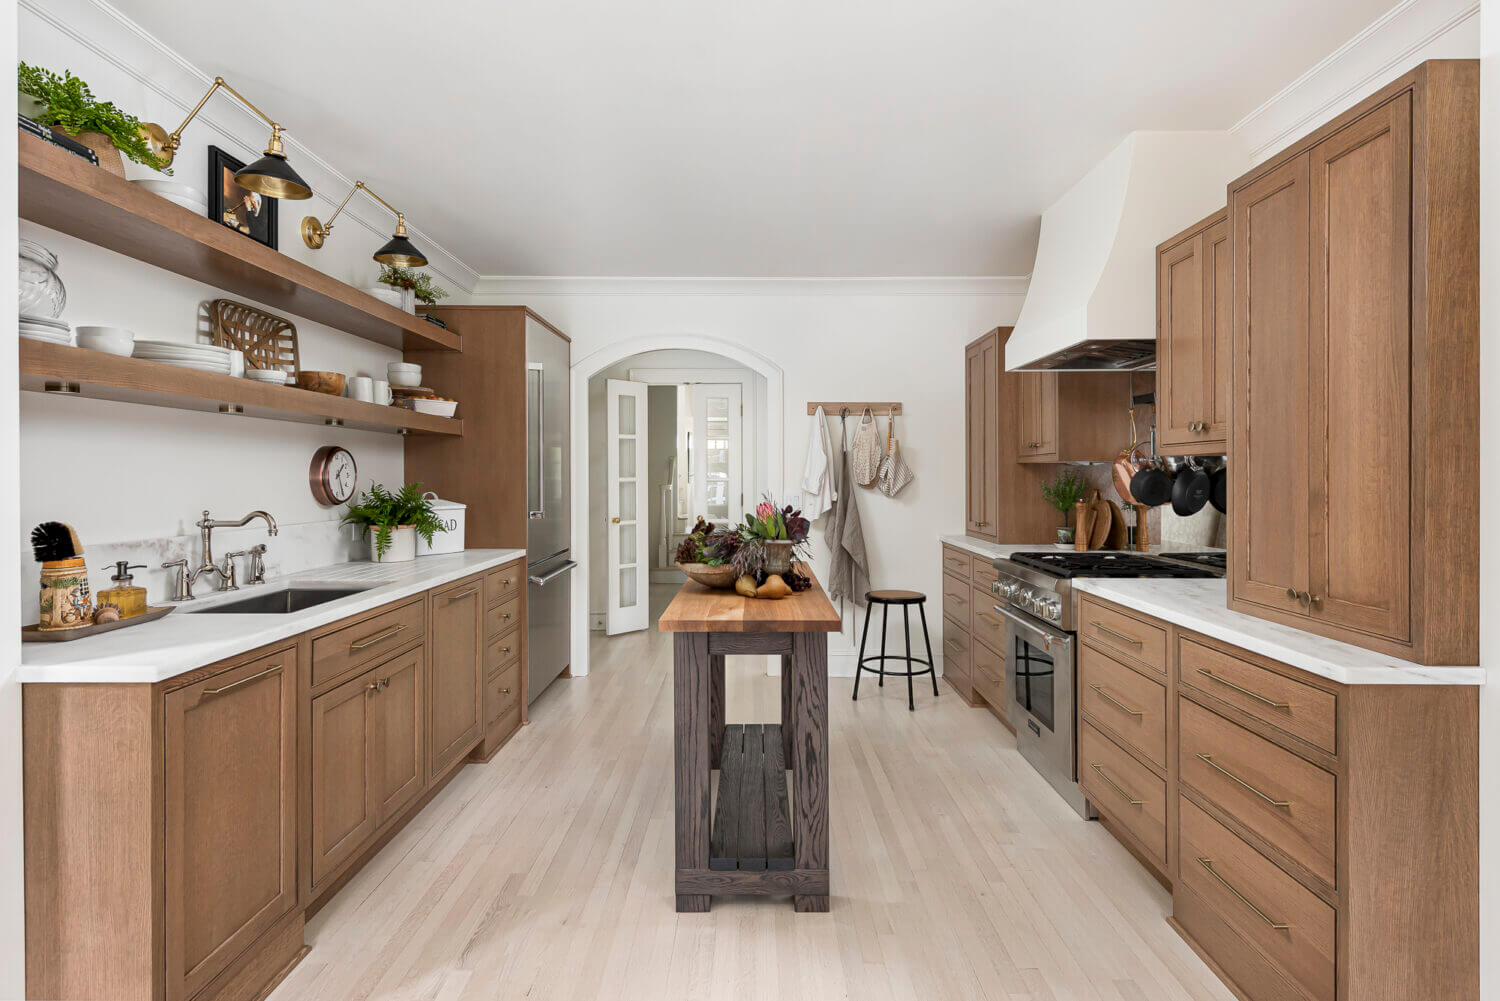 A galley kitchen layout with a thin, tiny kitchen island table.